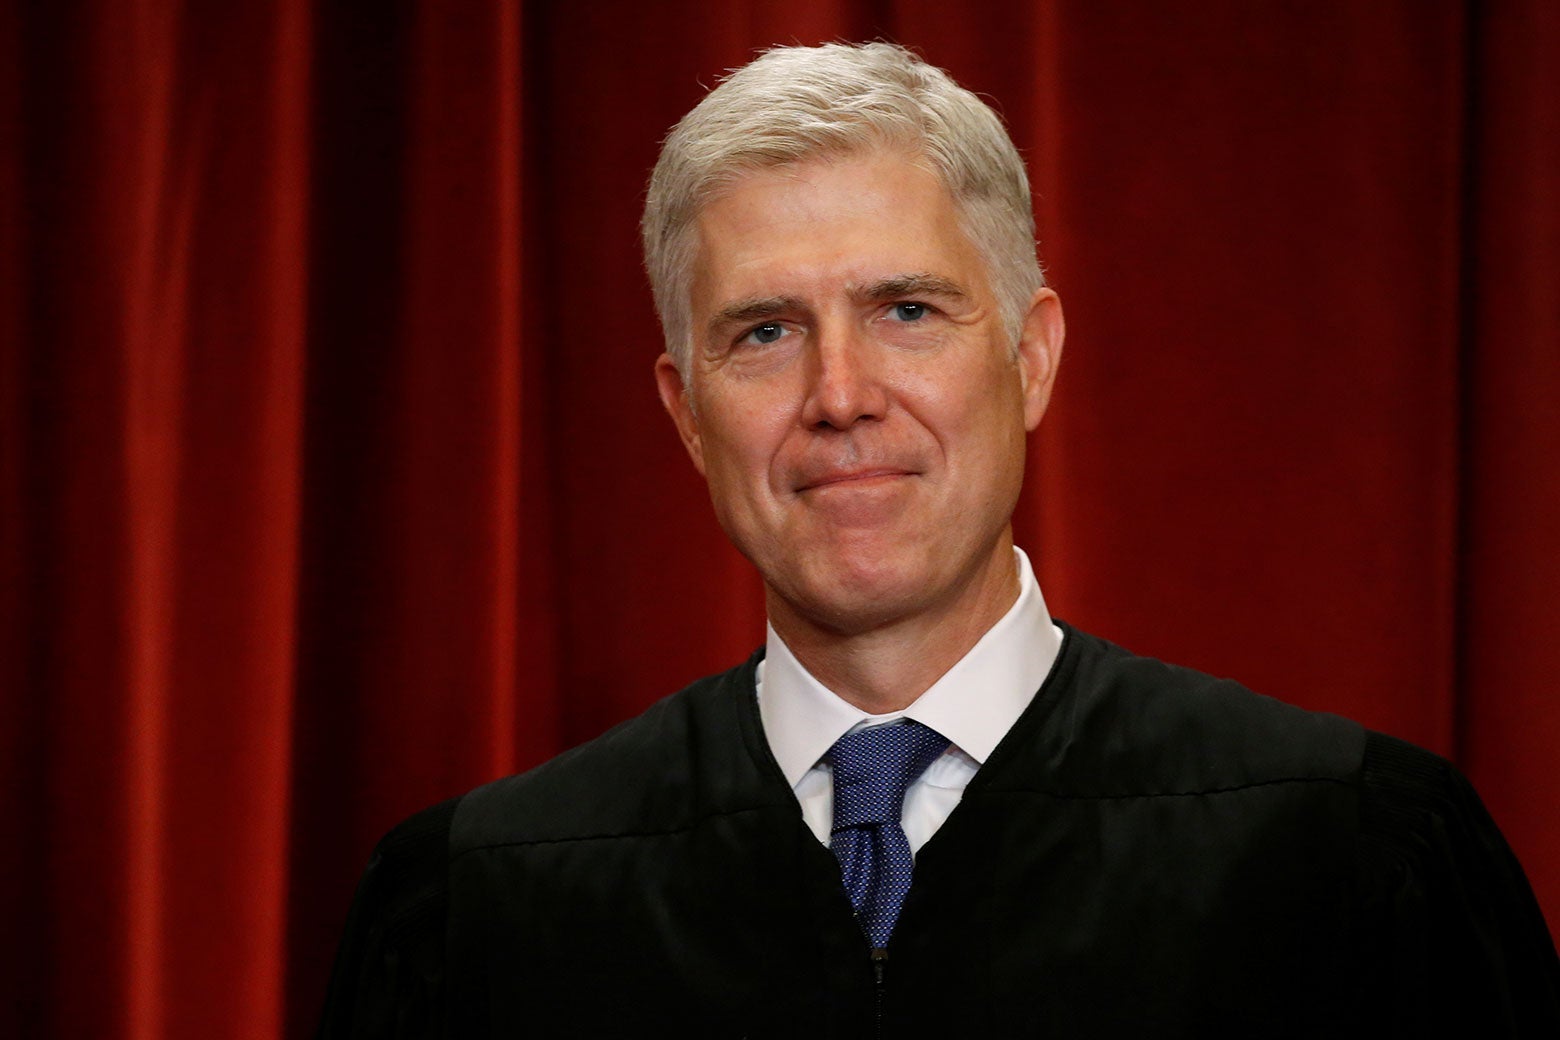 Justice Neil Gorsuch in robes against a red curtain.